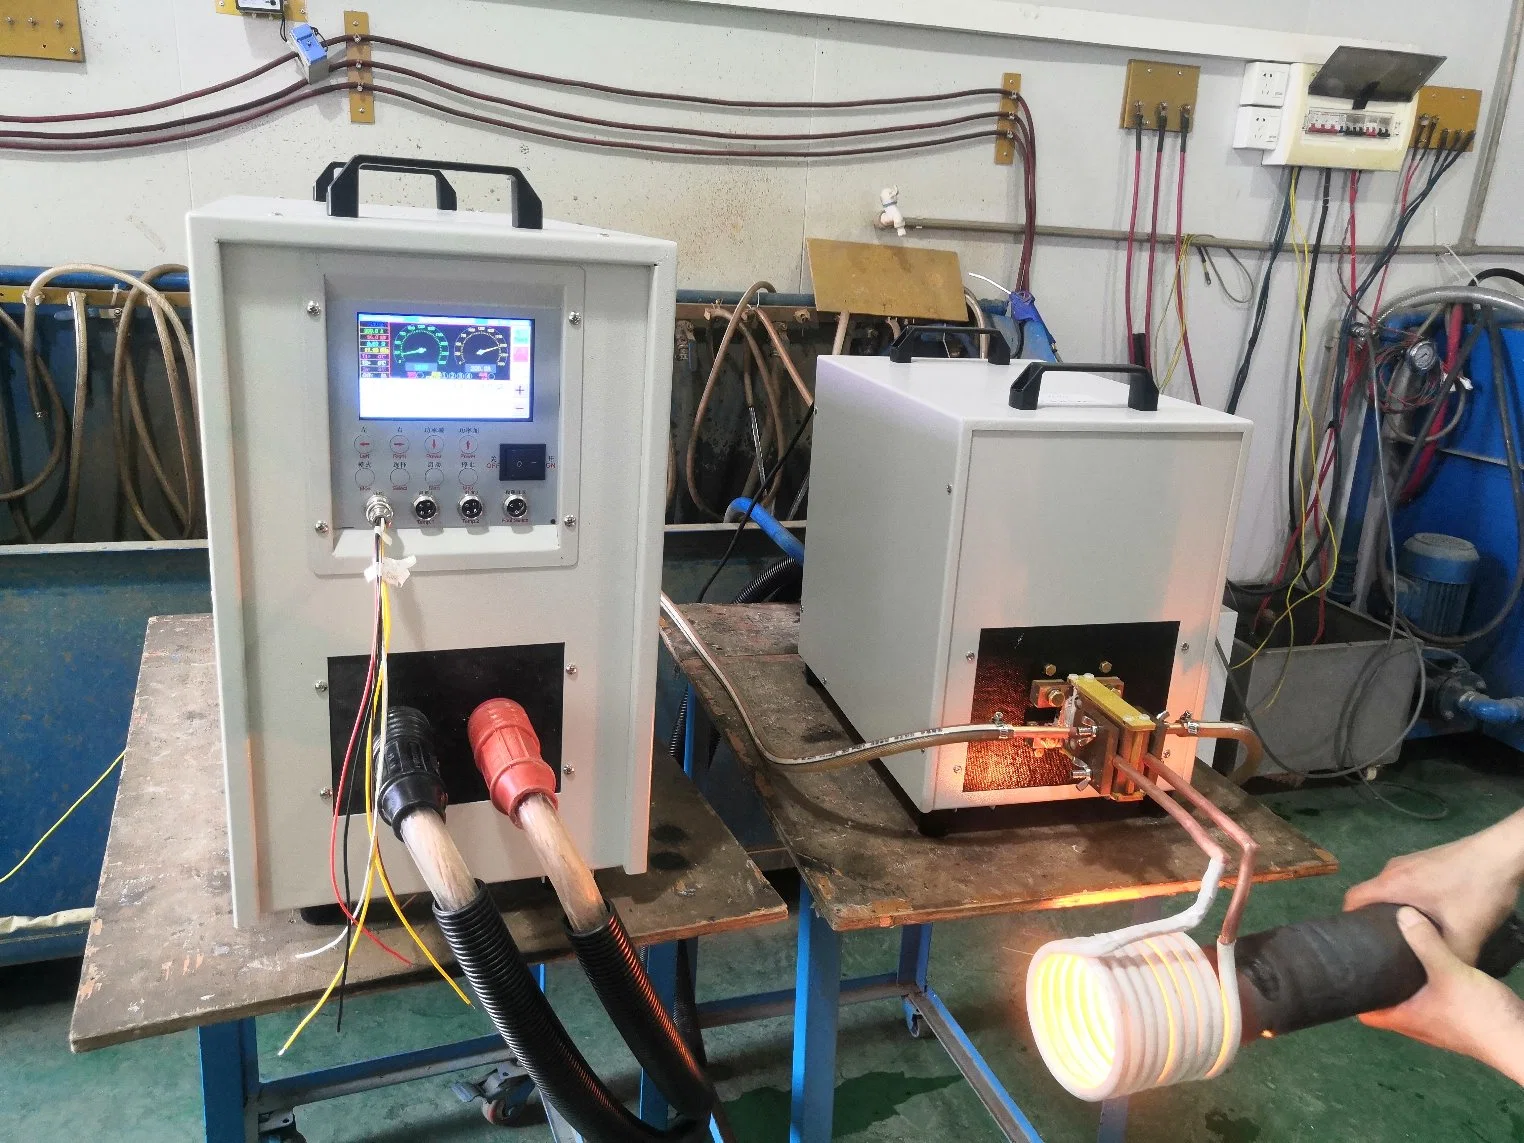 Hot Sales Factory Supplier Digital Medium Frequency Induction Heating Machine Mf-40kw for Hot Forging, Heating Treatment, Annealing, Quenching and Melting